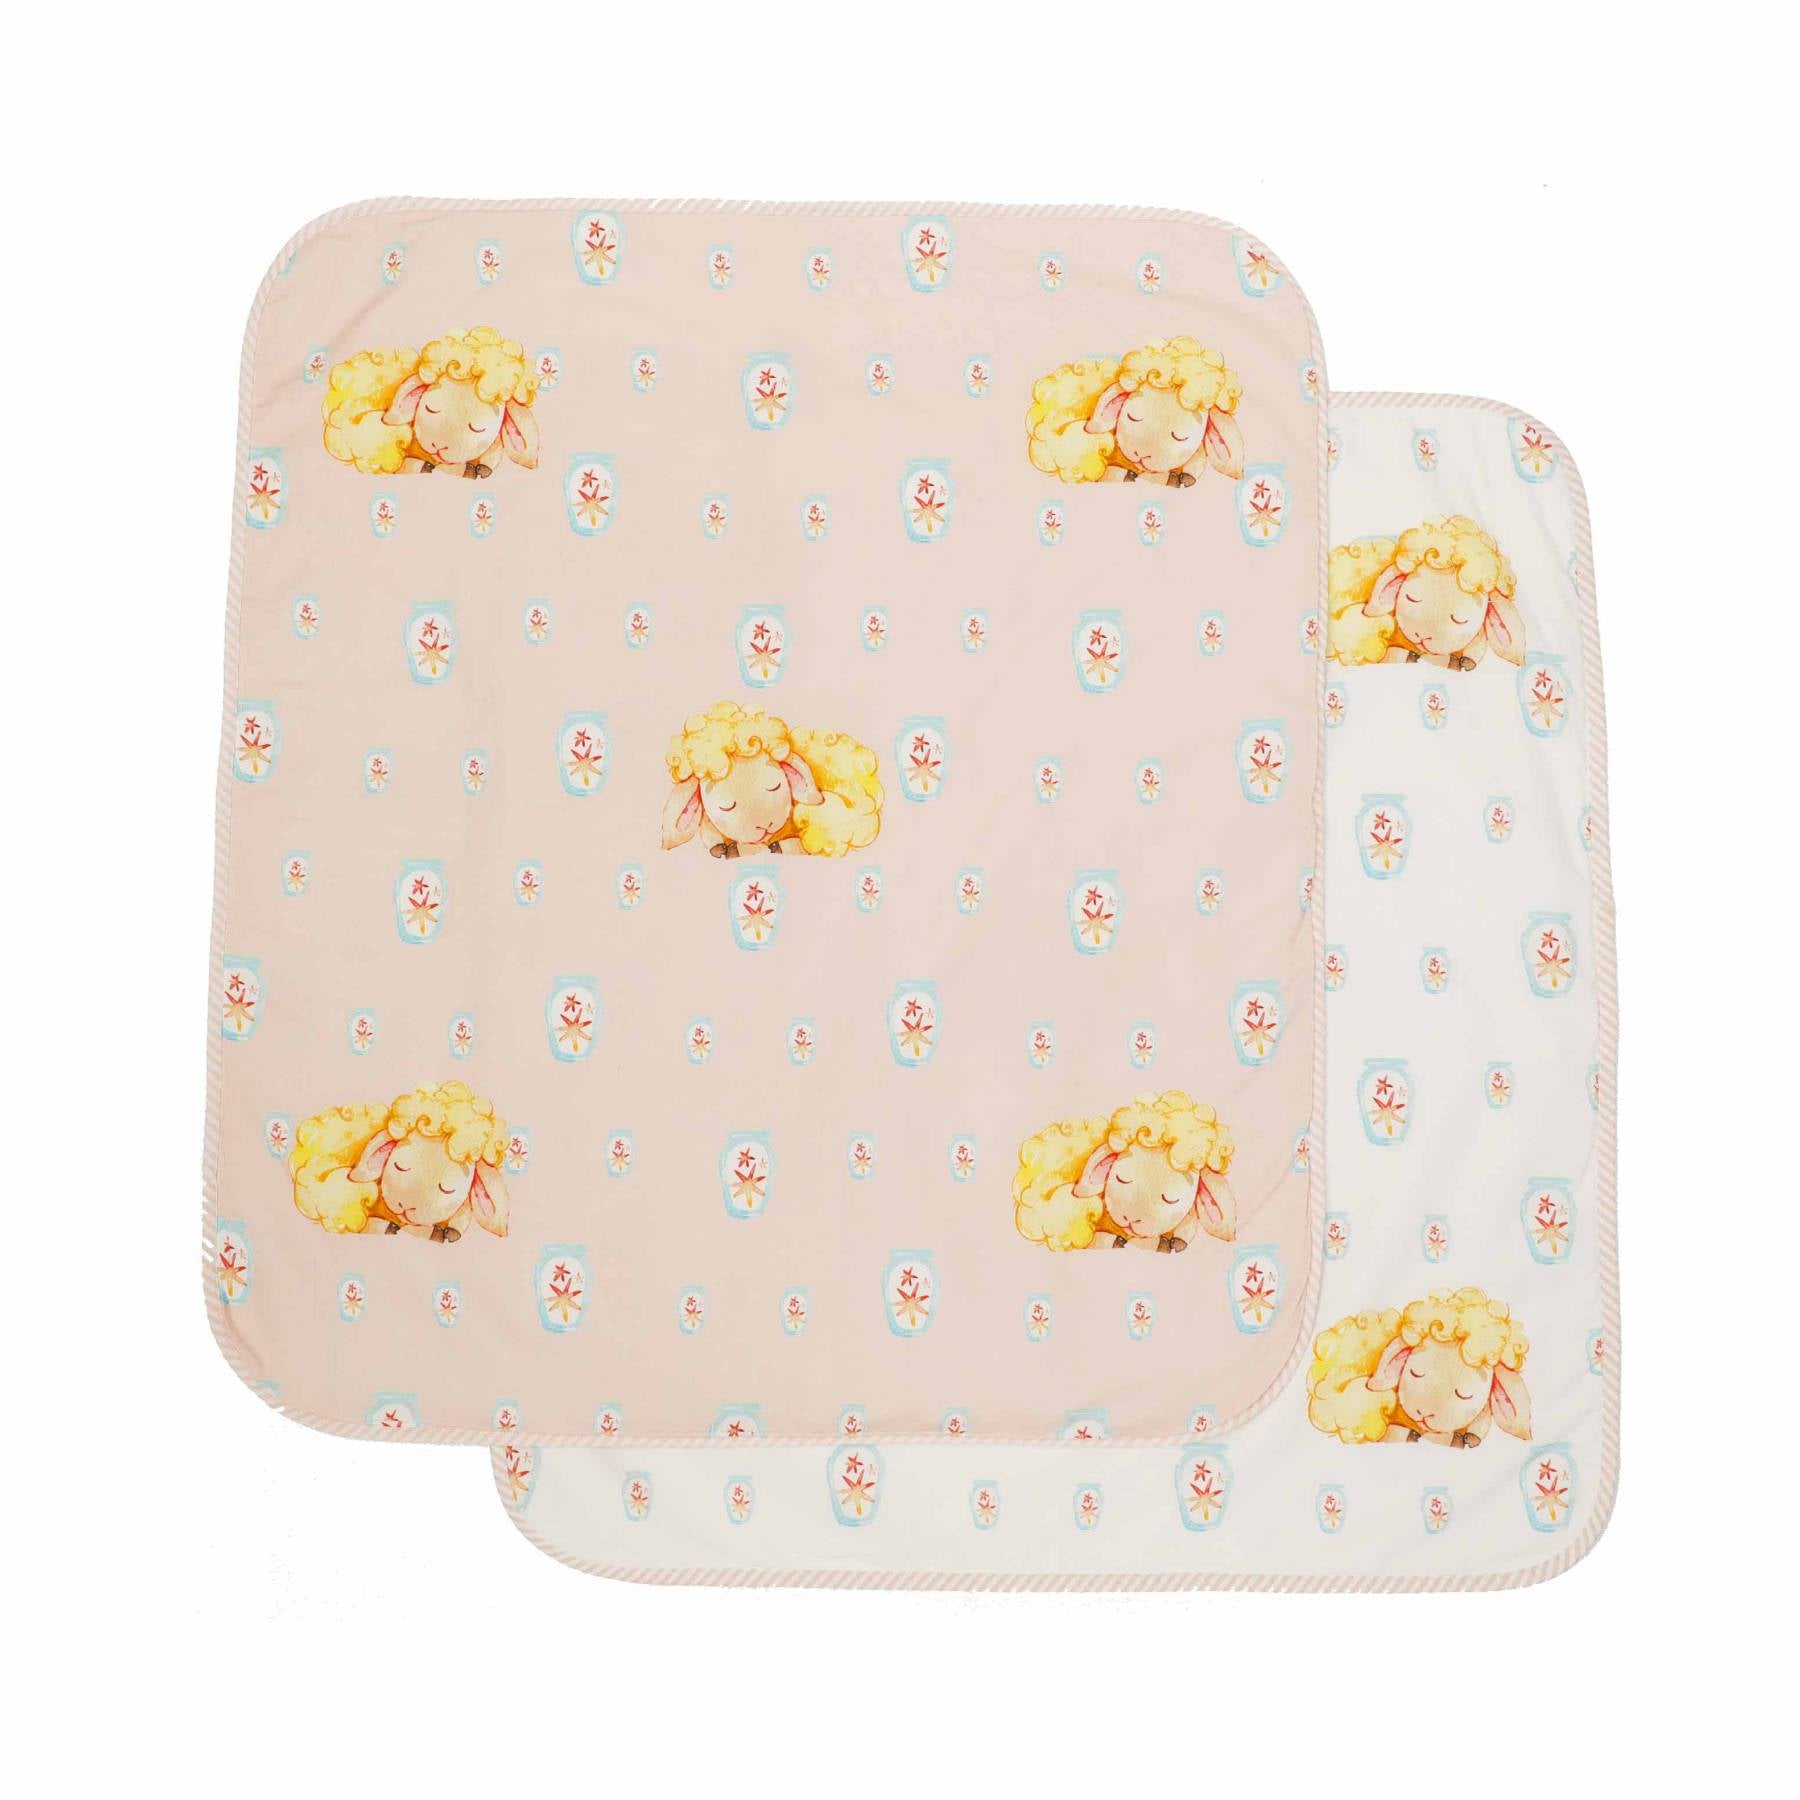 Fluffy the Sheep - Snuggly Waterproof Sheets Pair